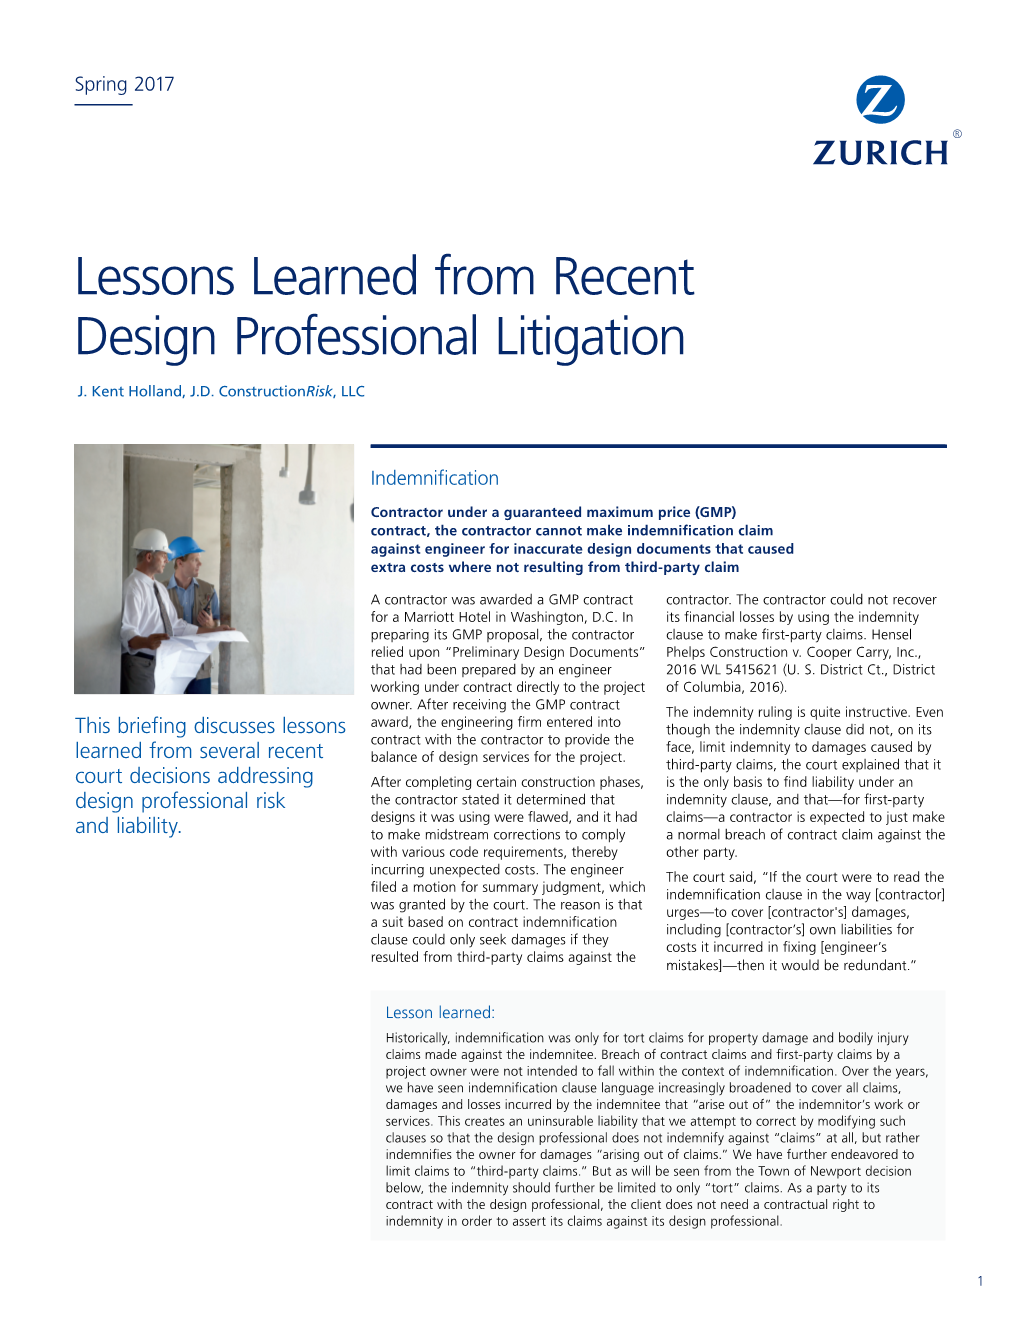 Lessons Learned from Recent Design Professional Litigation